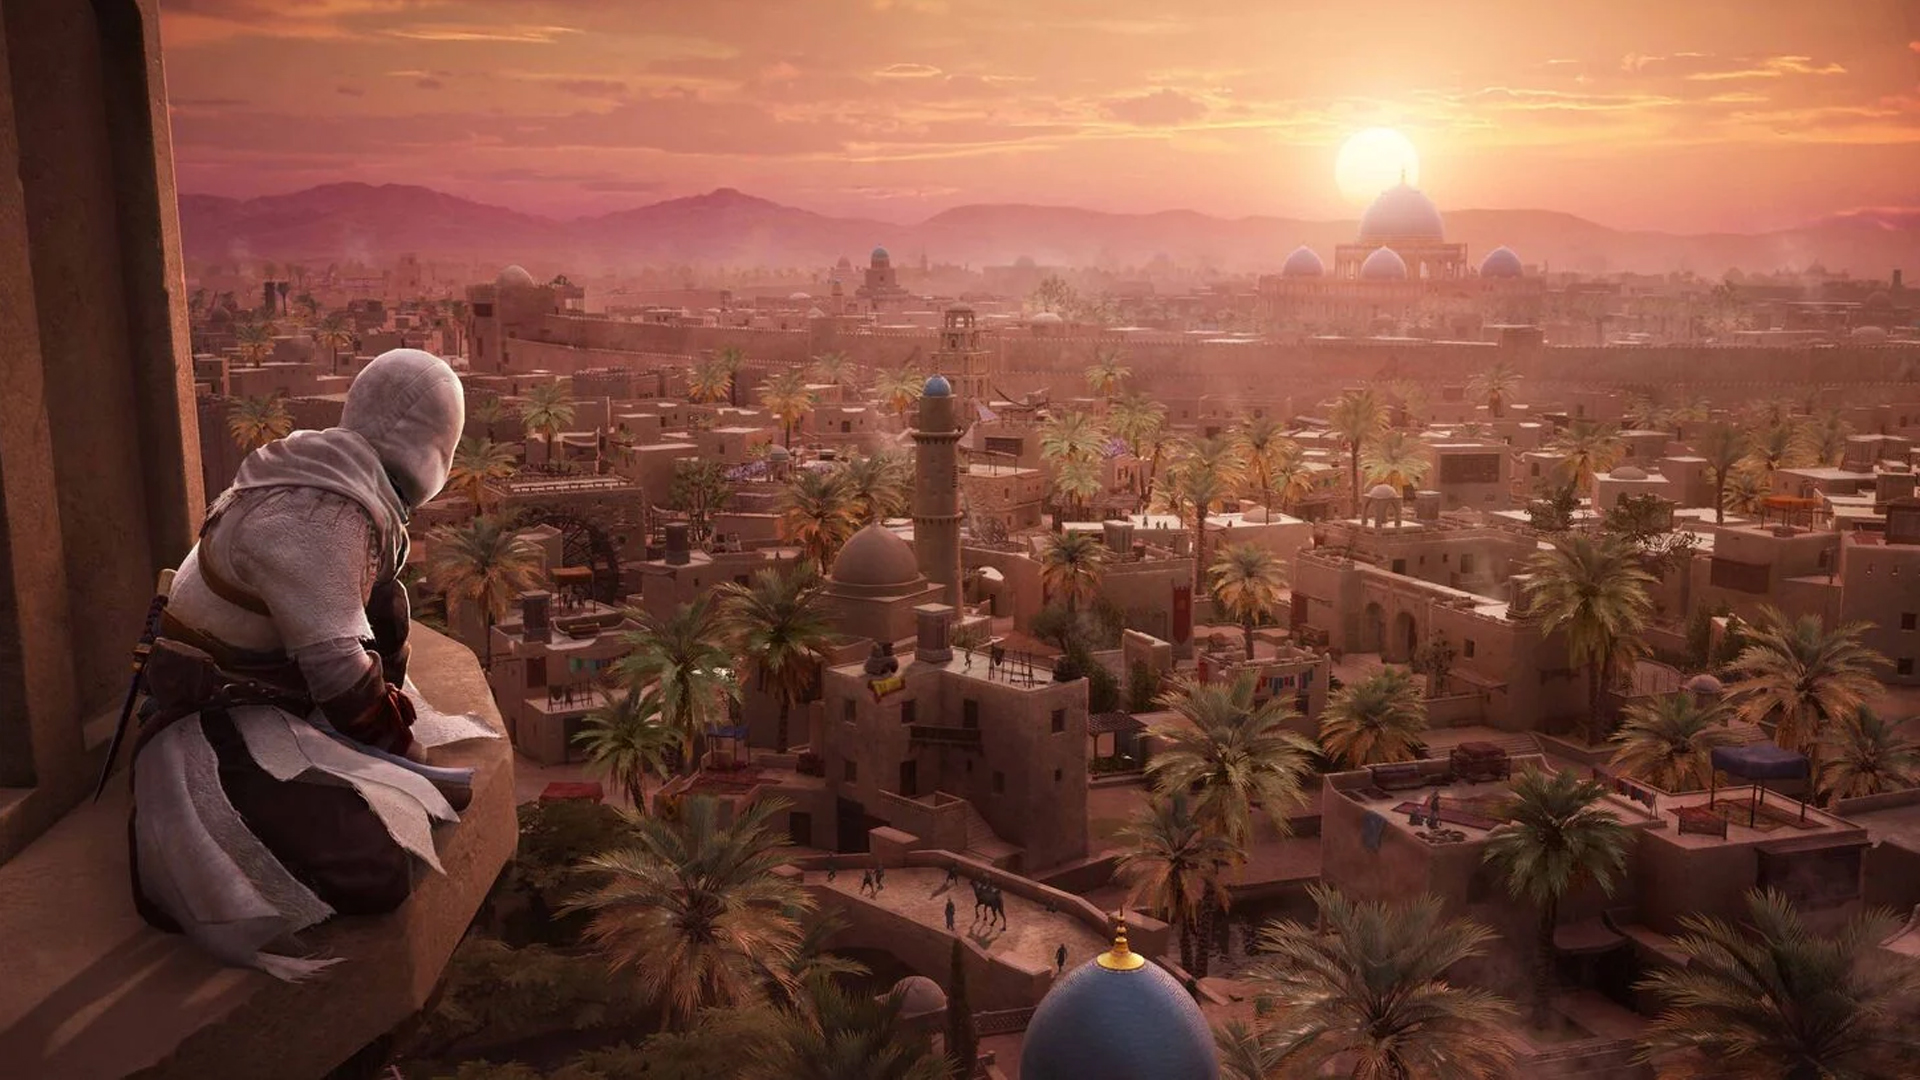 Assassin's Creed Mirage release times on PC and console